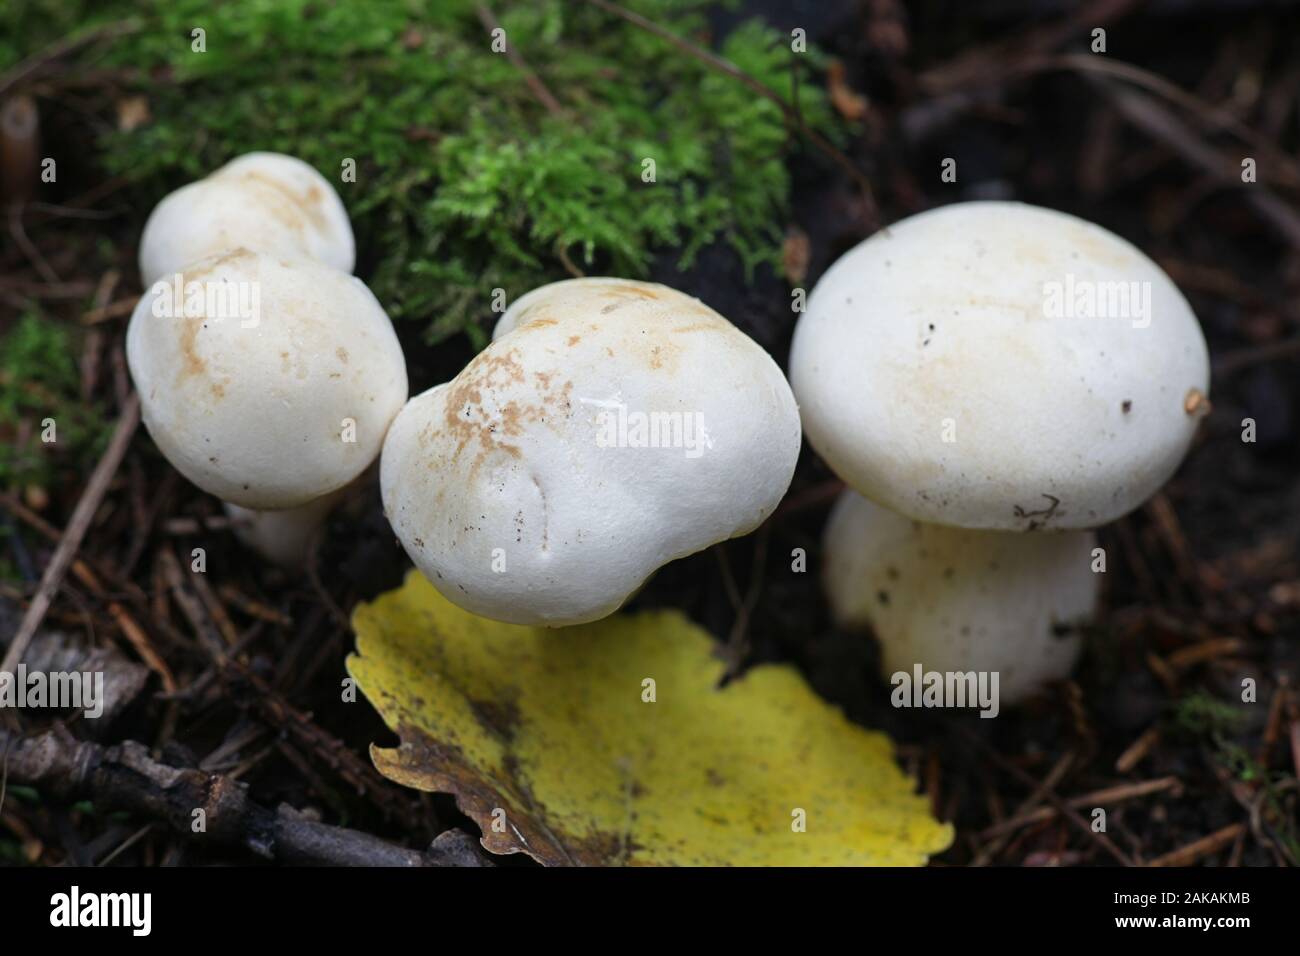 Tricholoma stiparophyllum, known as chemical knight or white knight, mushrooms from Finland Stock Photo